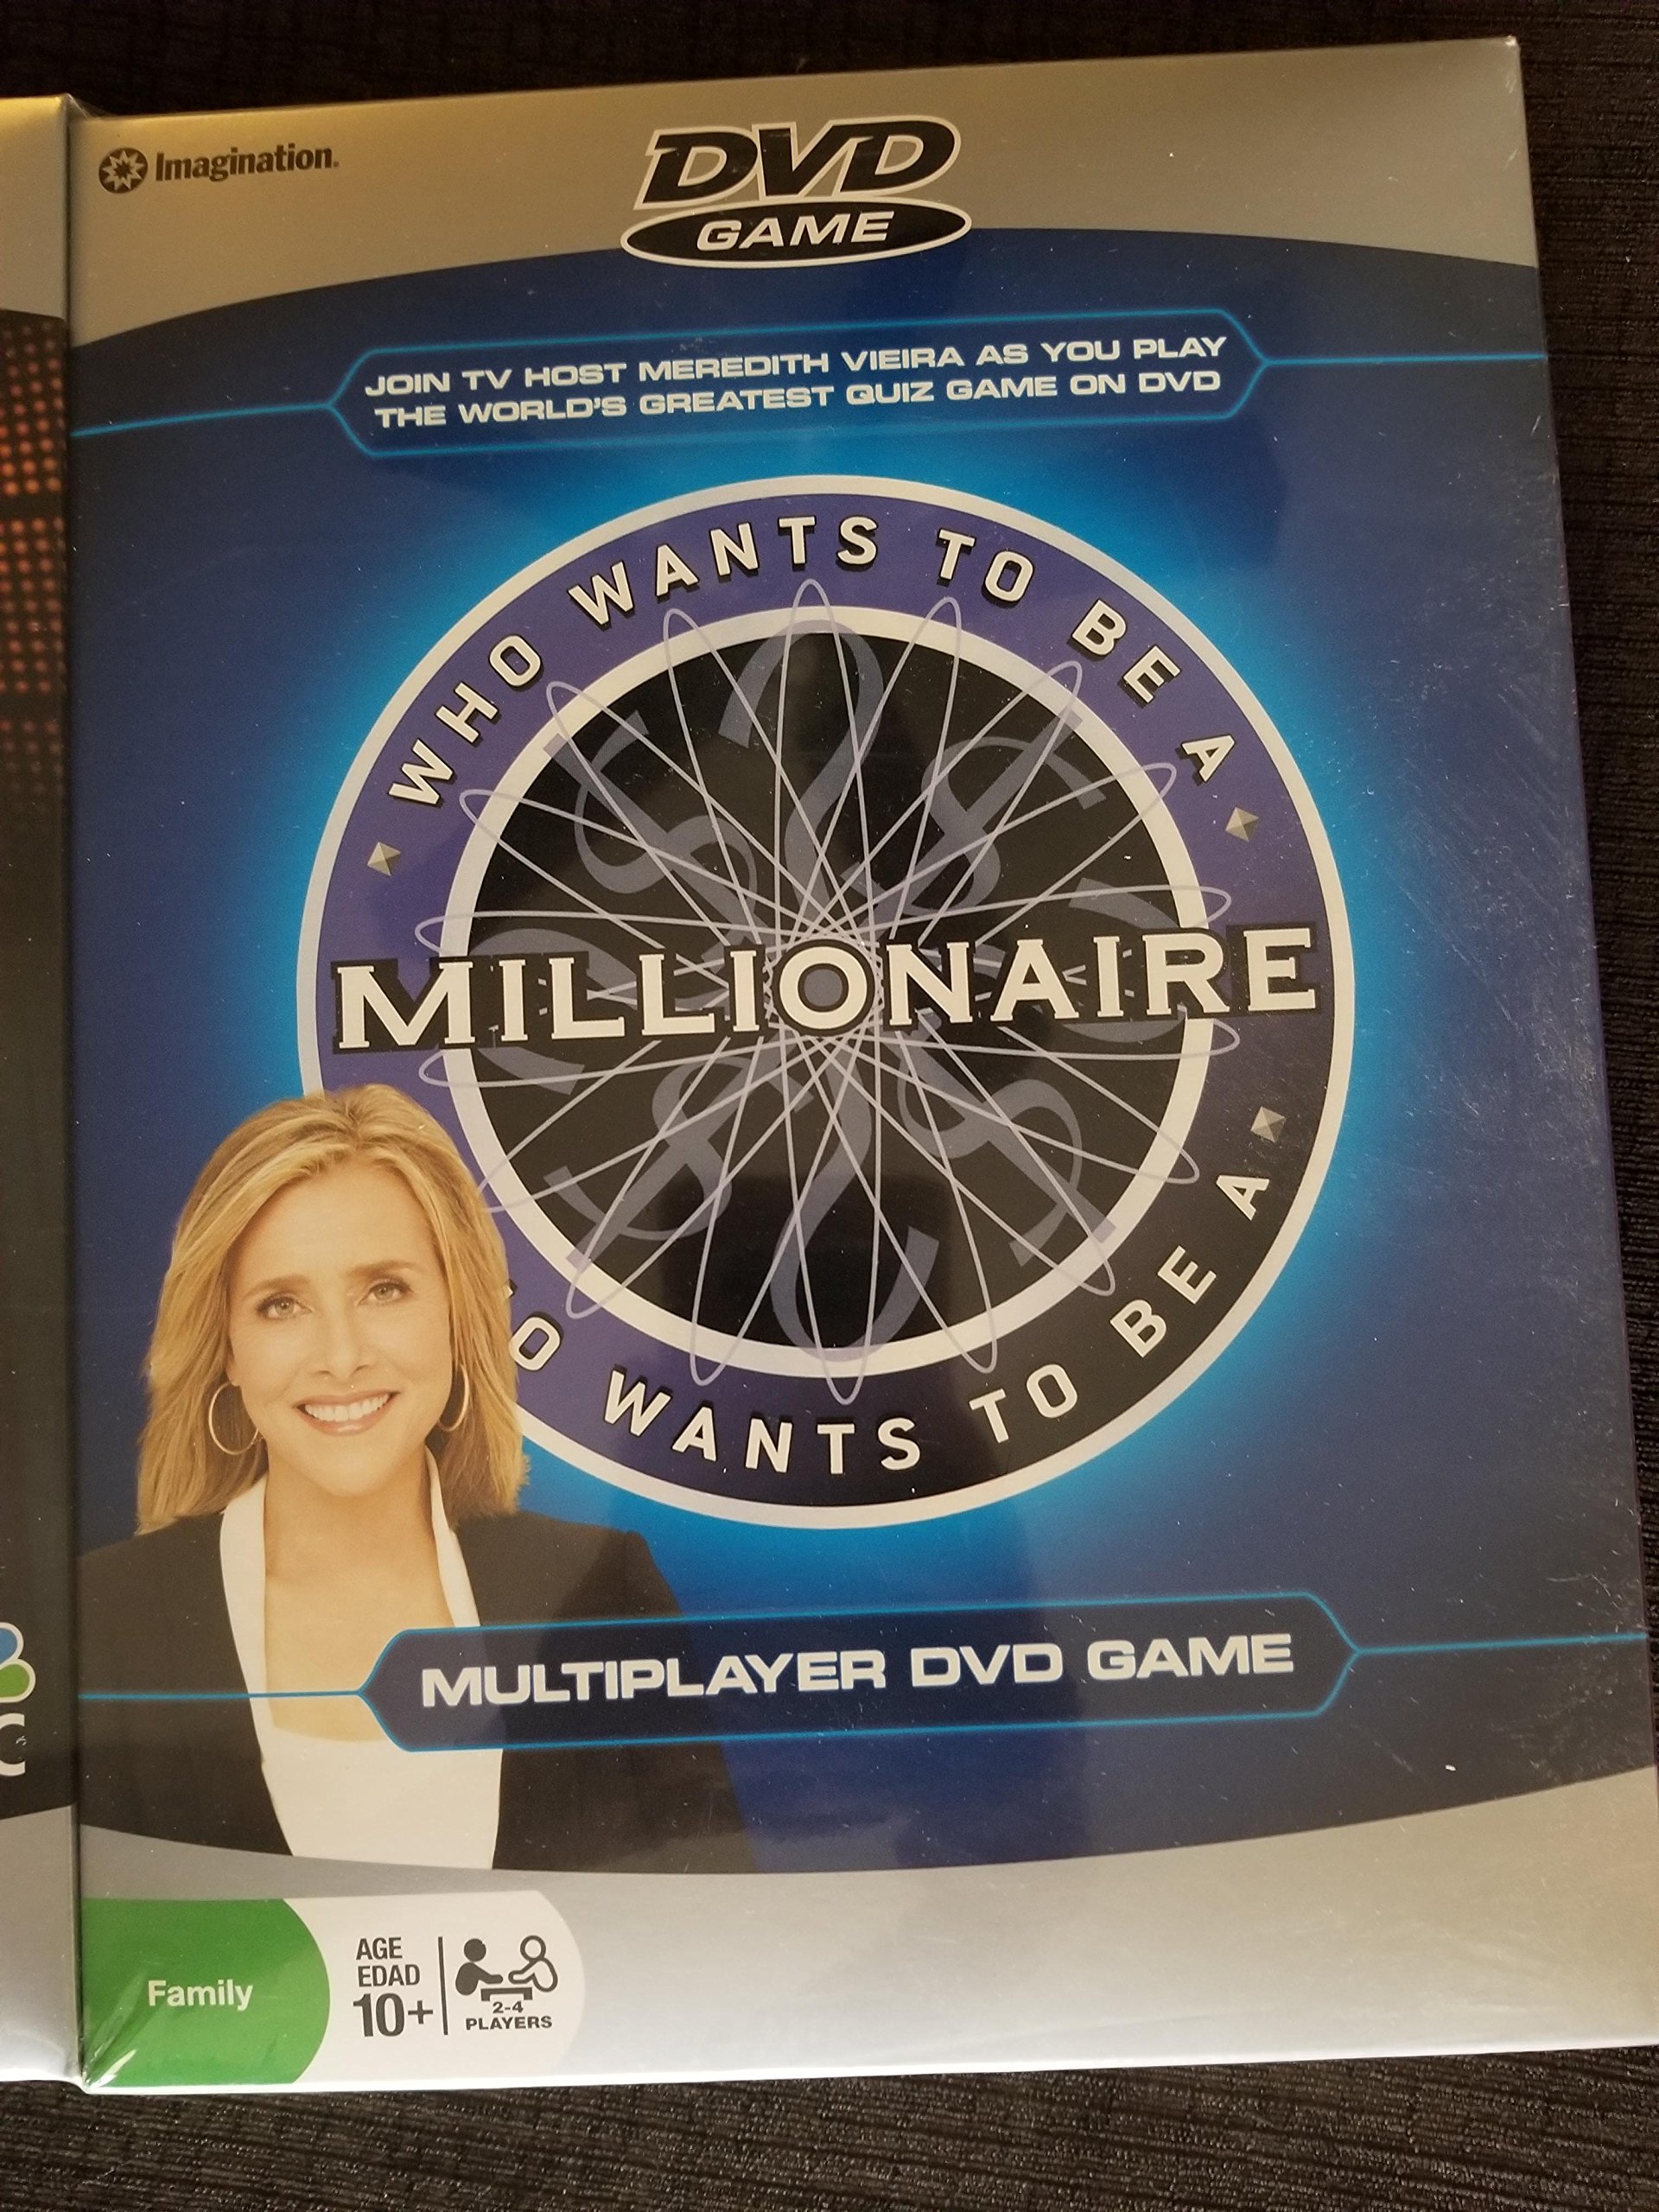 DVD Game 3 Pack - Family Feud - Deal or No Deal - Who Wants to Be a Millionaire